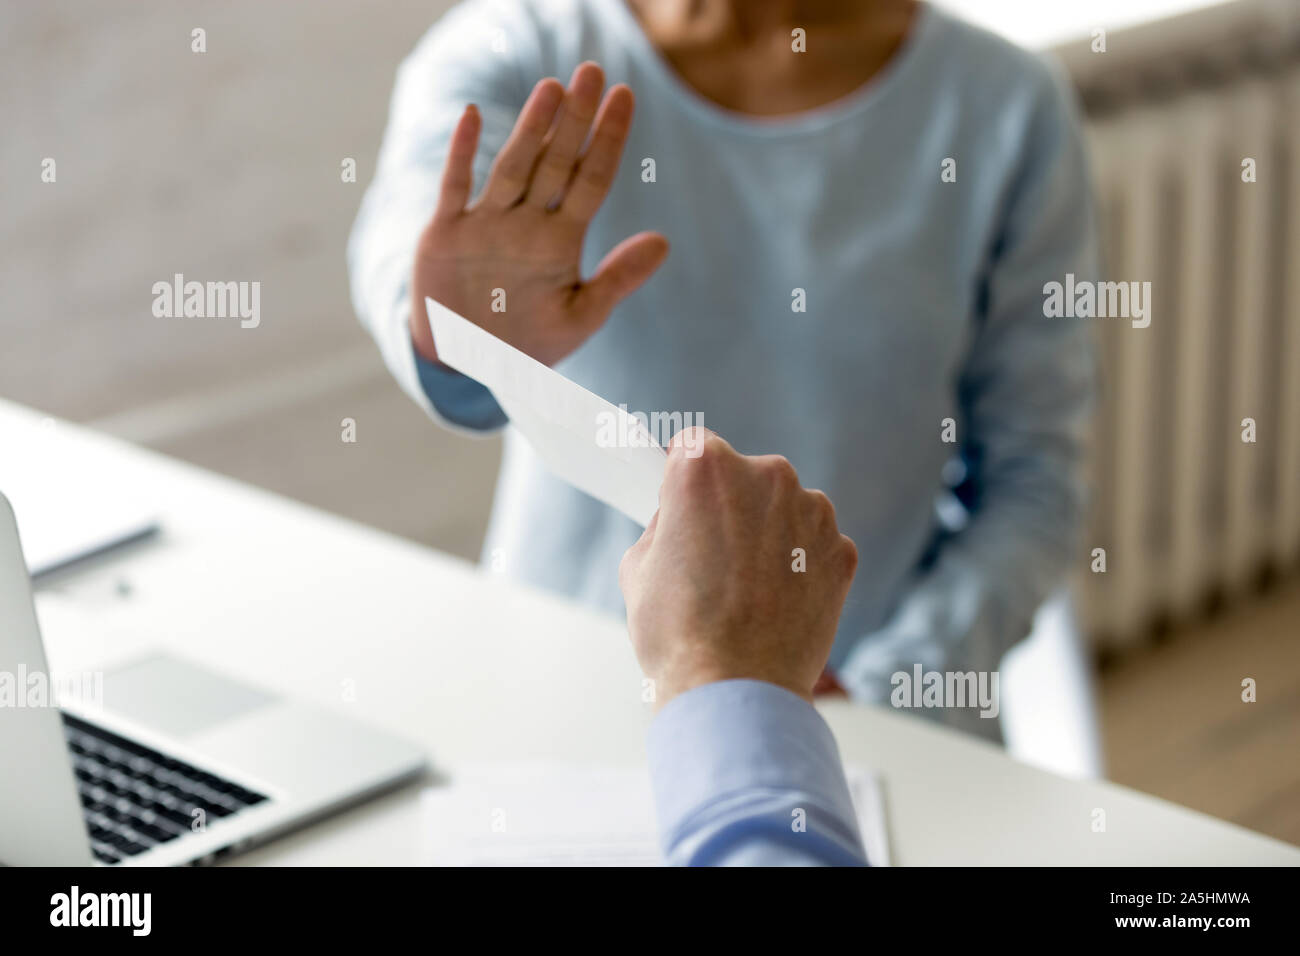 Honest company worker rejecting corrupting and bribery at workplace. Stock Photo